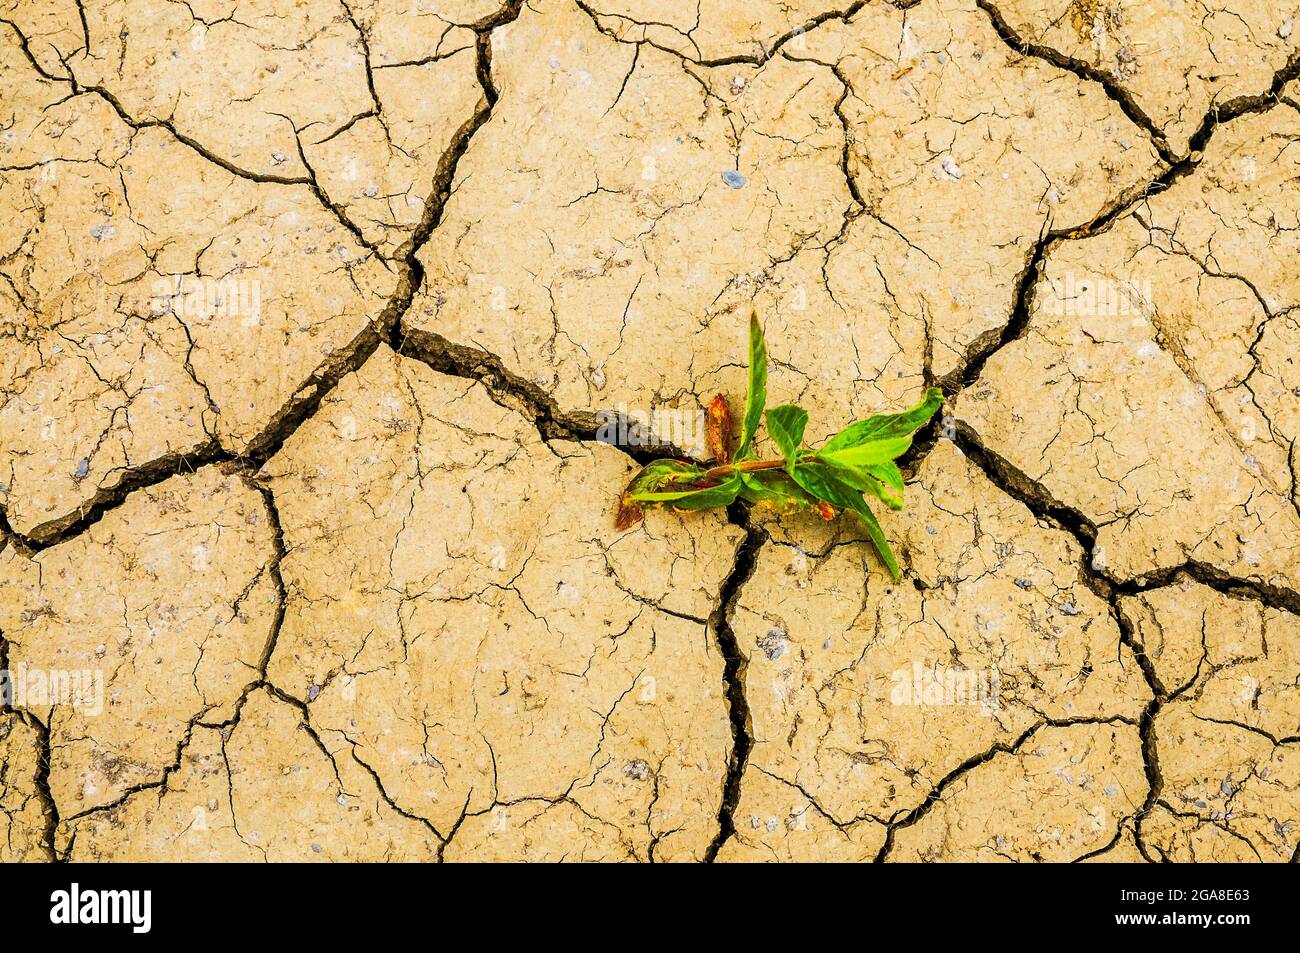 cracked soil, earth due to drought,climate change Stock Photo